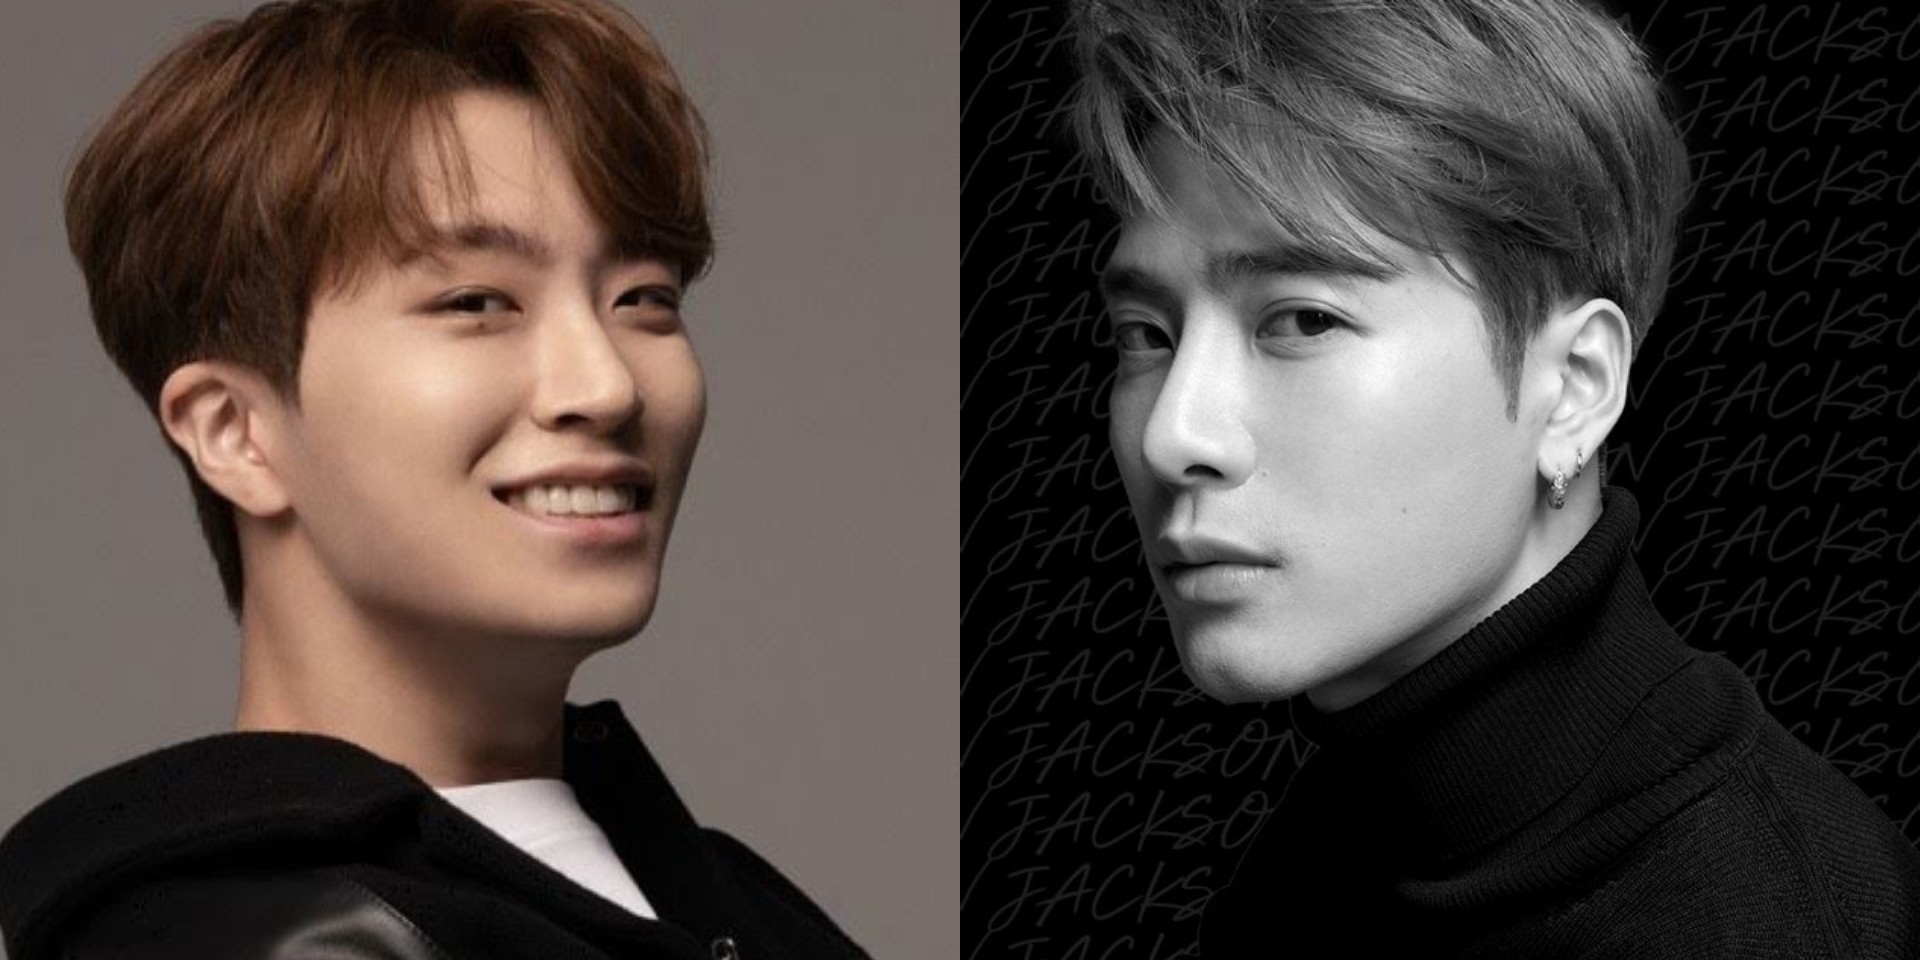 Sublime Agency welcomes GOT7 members Jackson Wang and Youngjae 